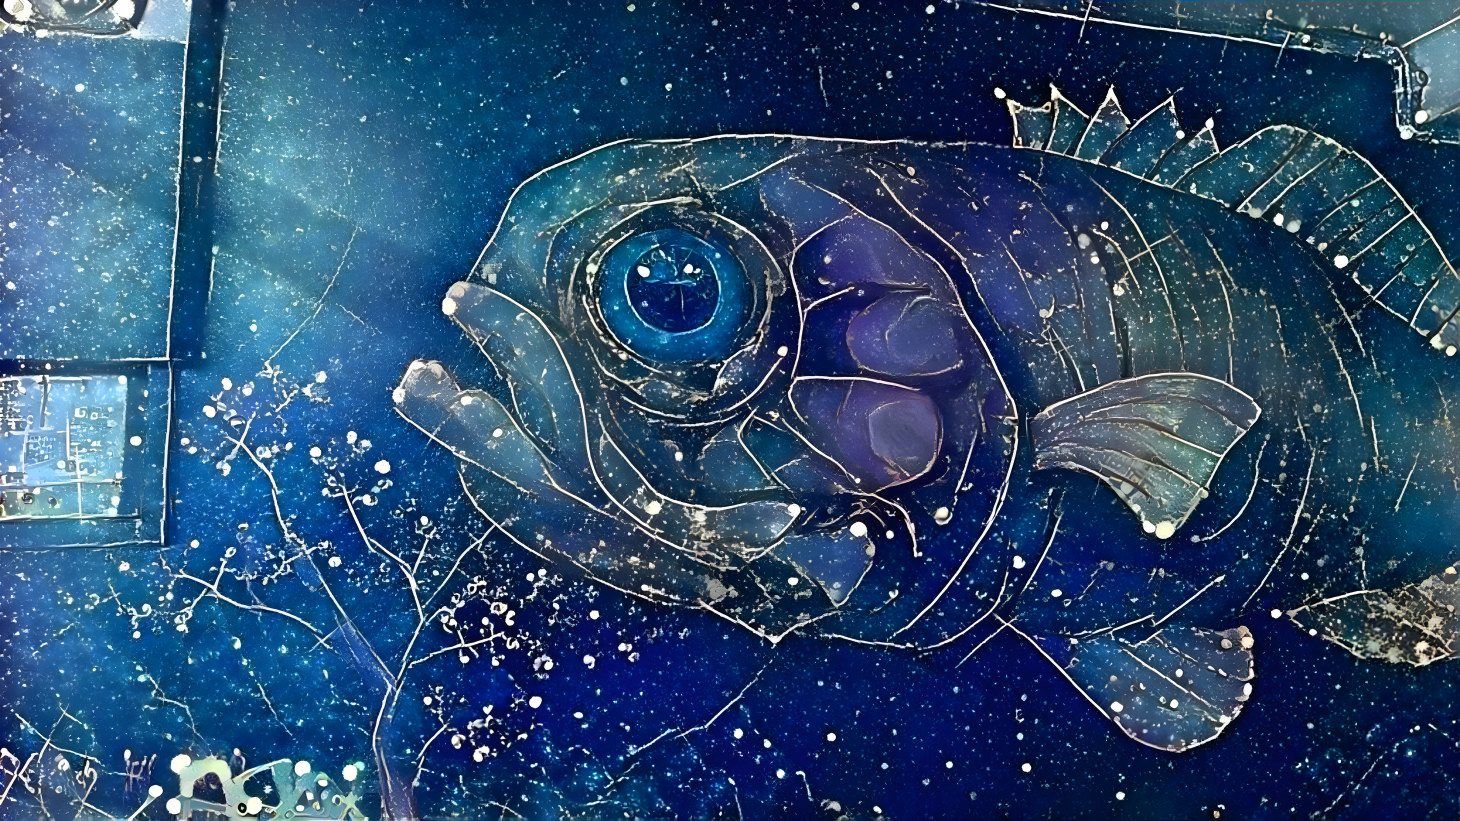 Space fish